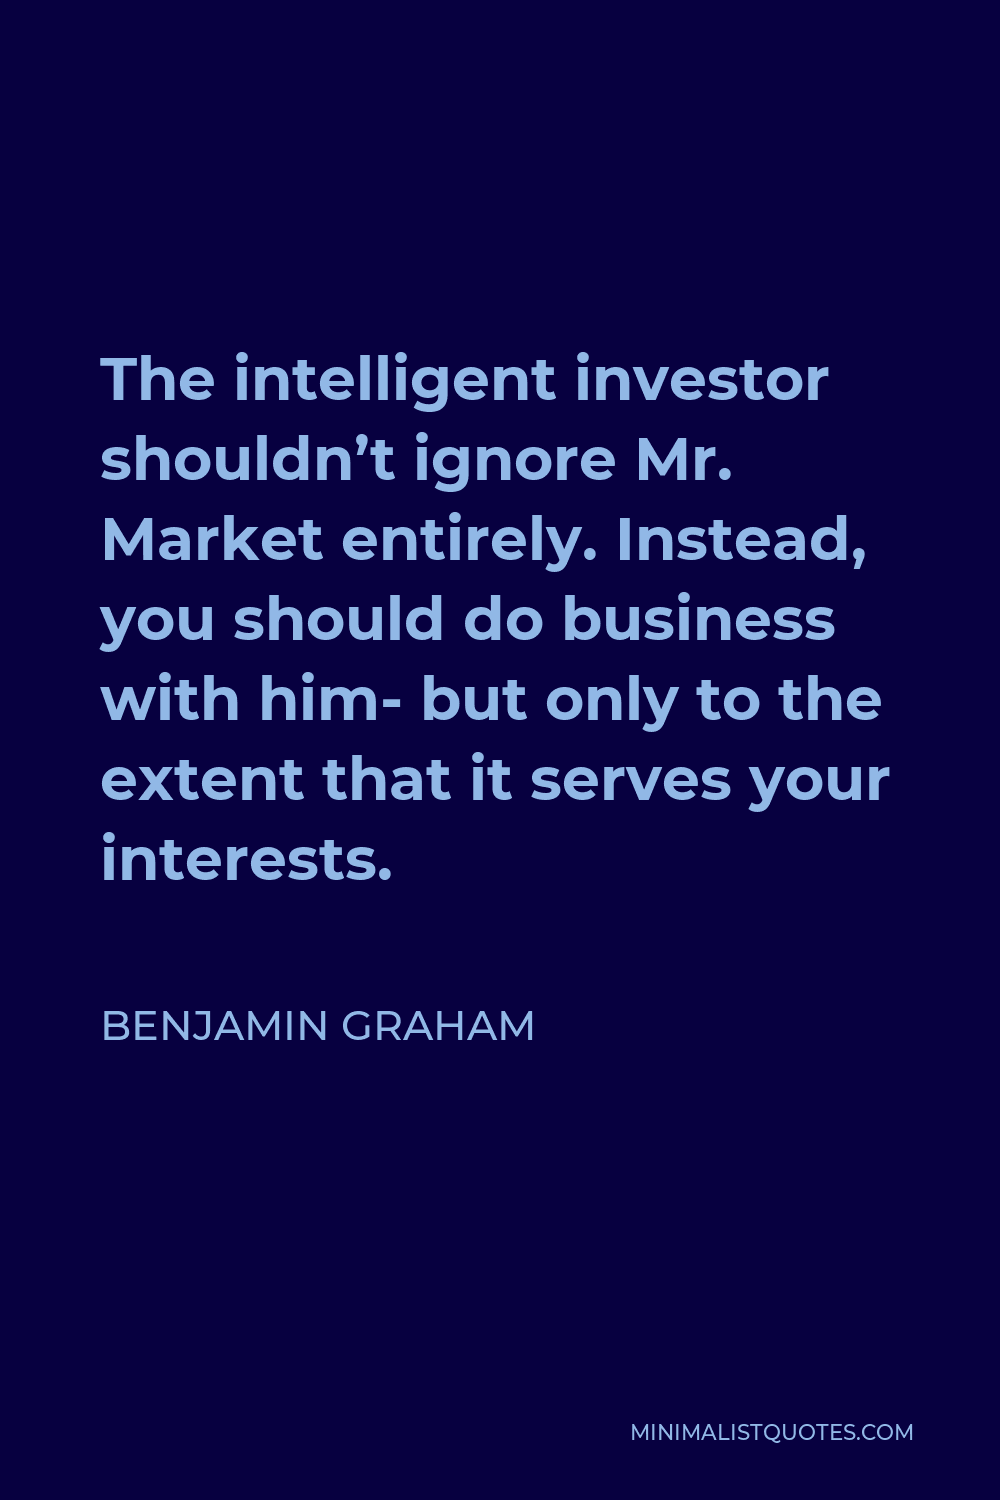 Benjamin Graham Quote - The intelligent investor shouldn’t ignore Mr. Market entirely. Instead, you should do business with him- but only to the extent that it serves your interests.